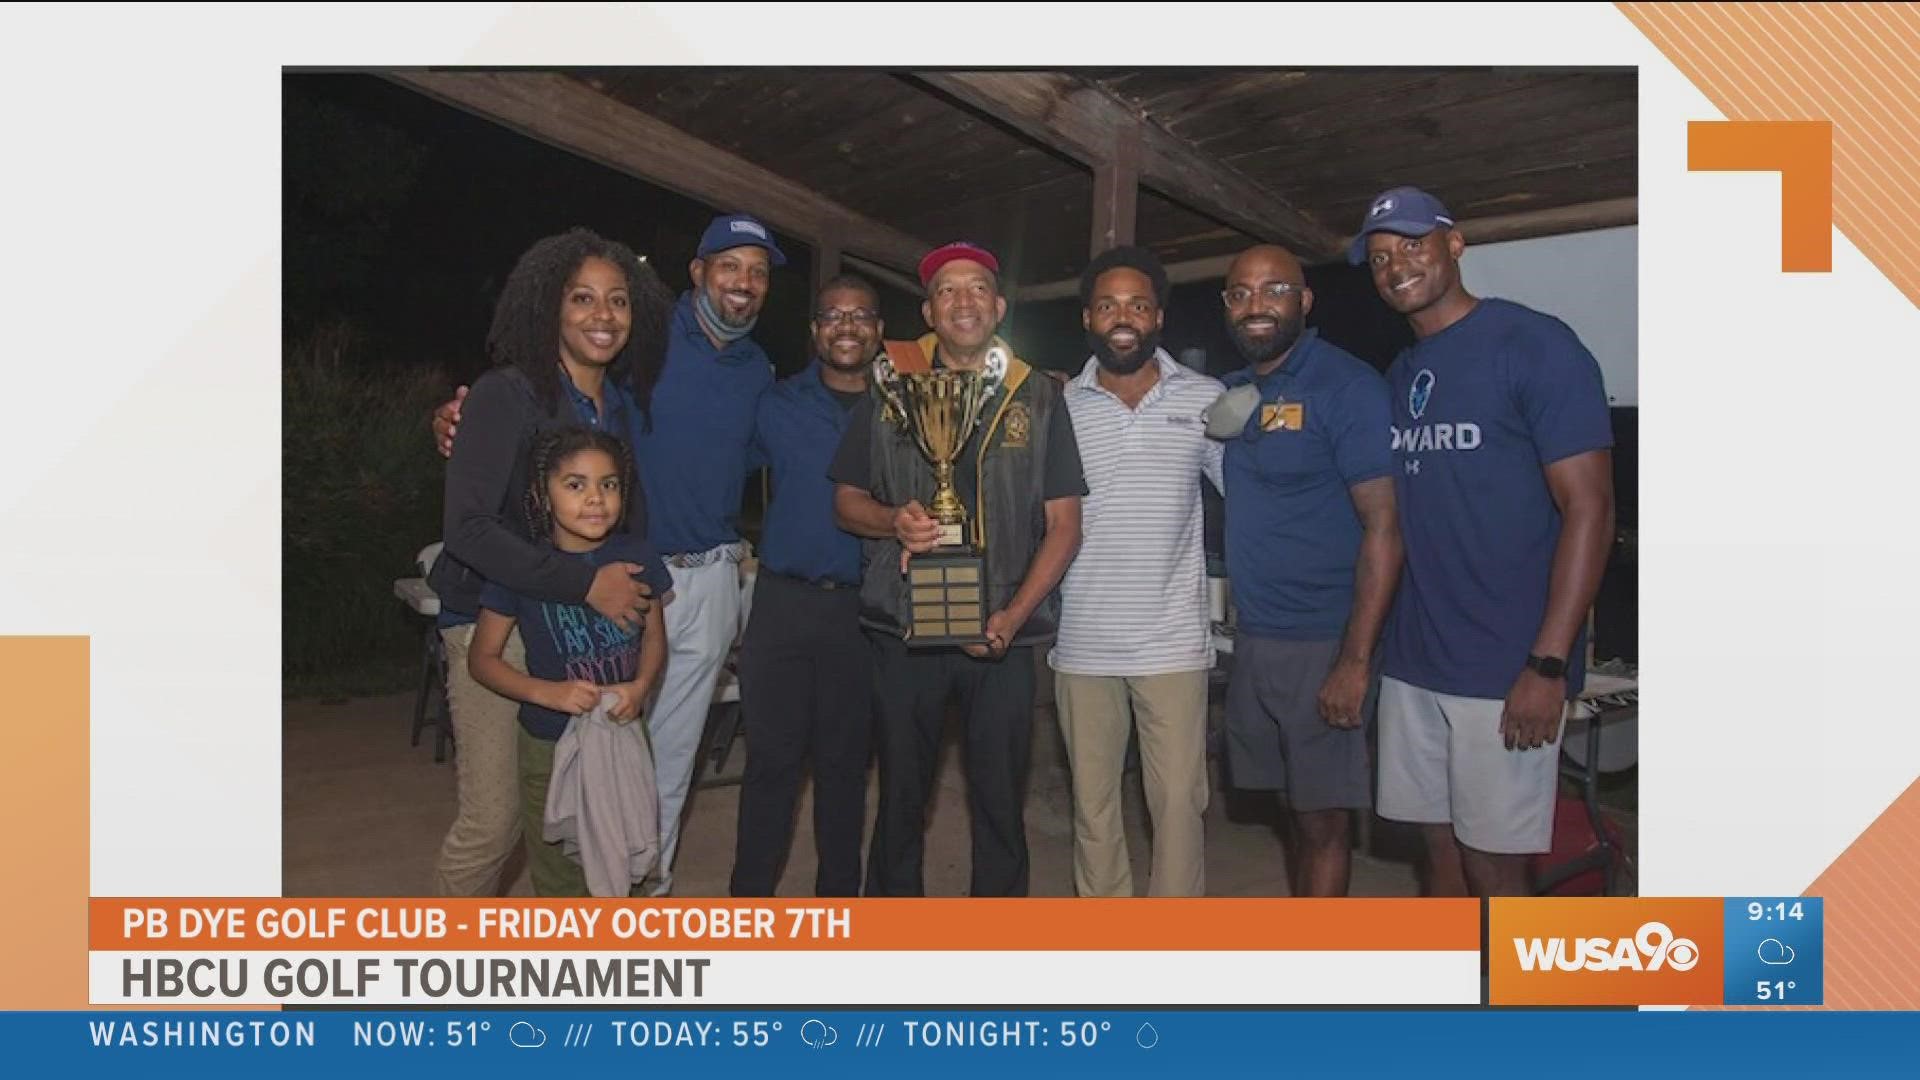 Russ Green gives details about the HBCU Golf Tournament at PB Dye Golf Club, raising money for students of HBCUs and awareness to stop domestic violence.